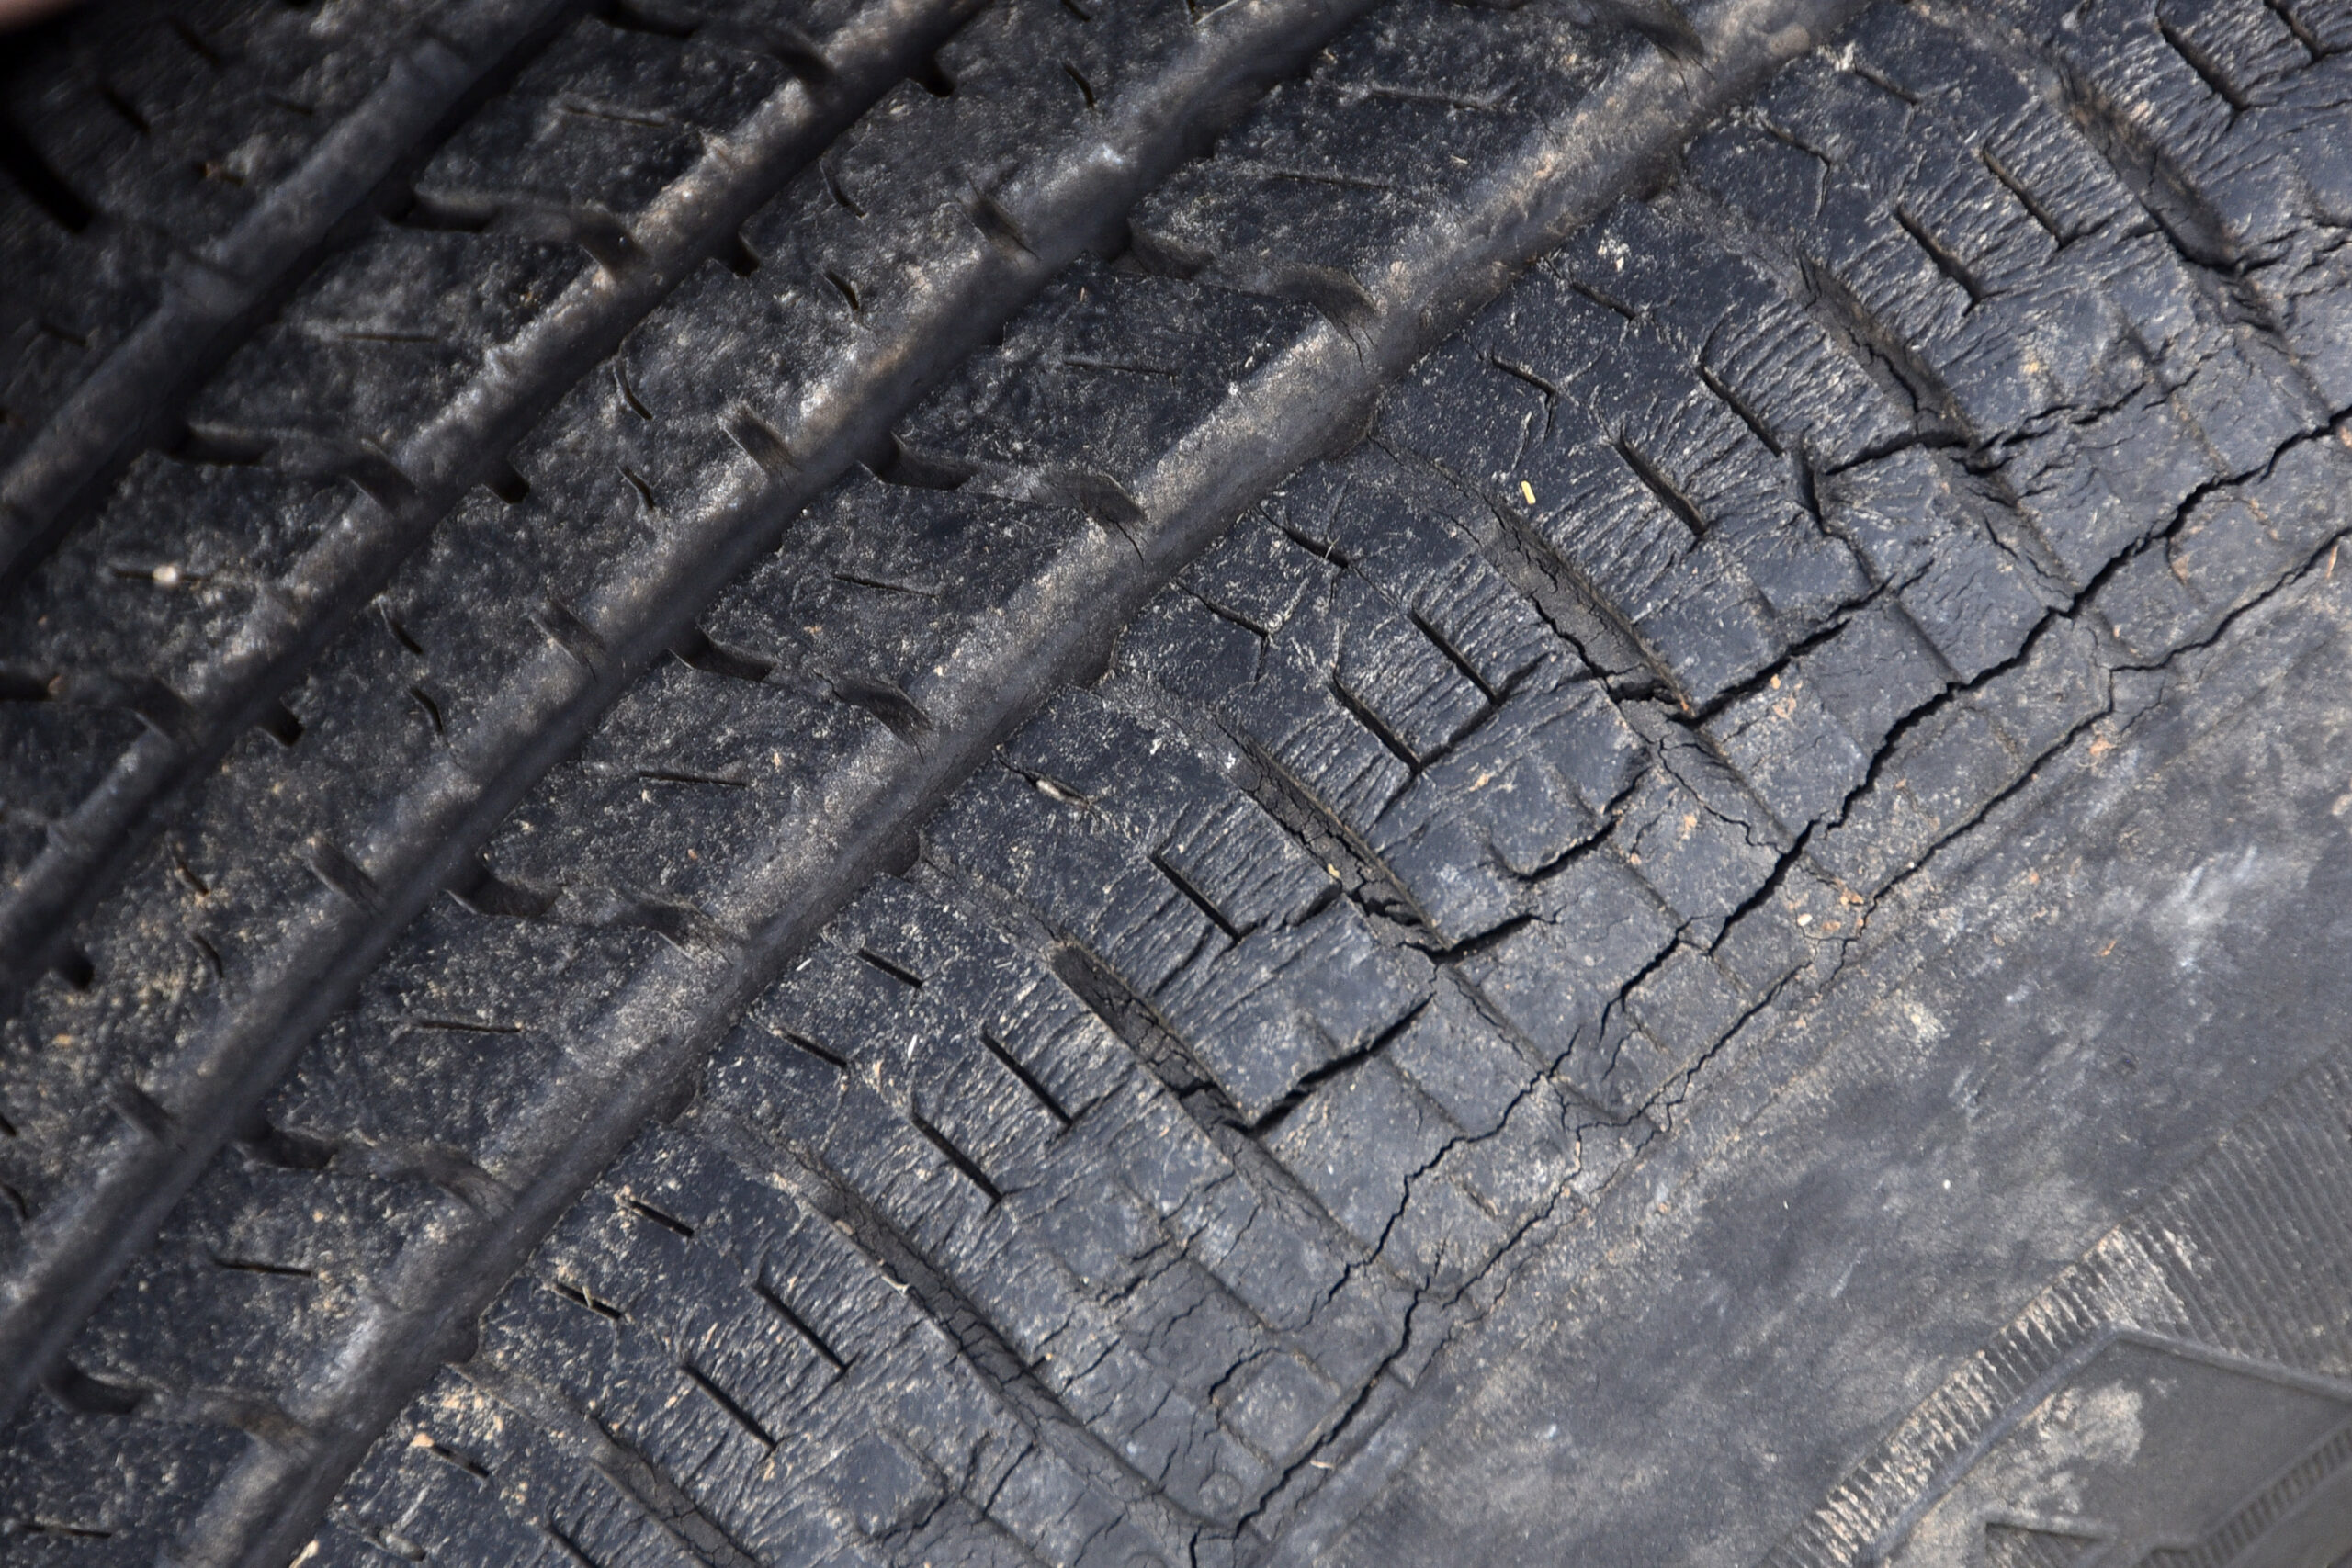 How Does Dry Rot Happen on Tires